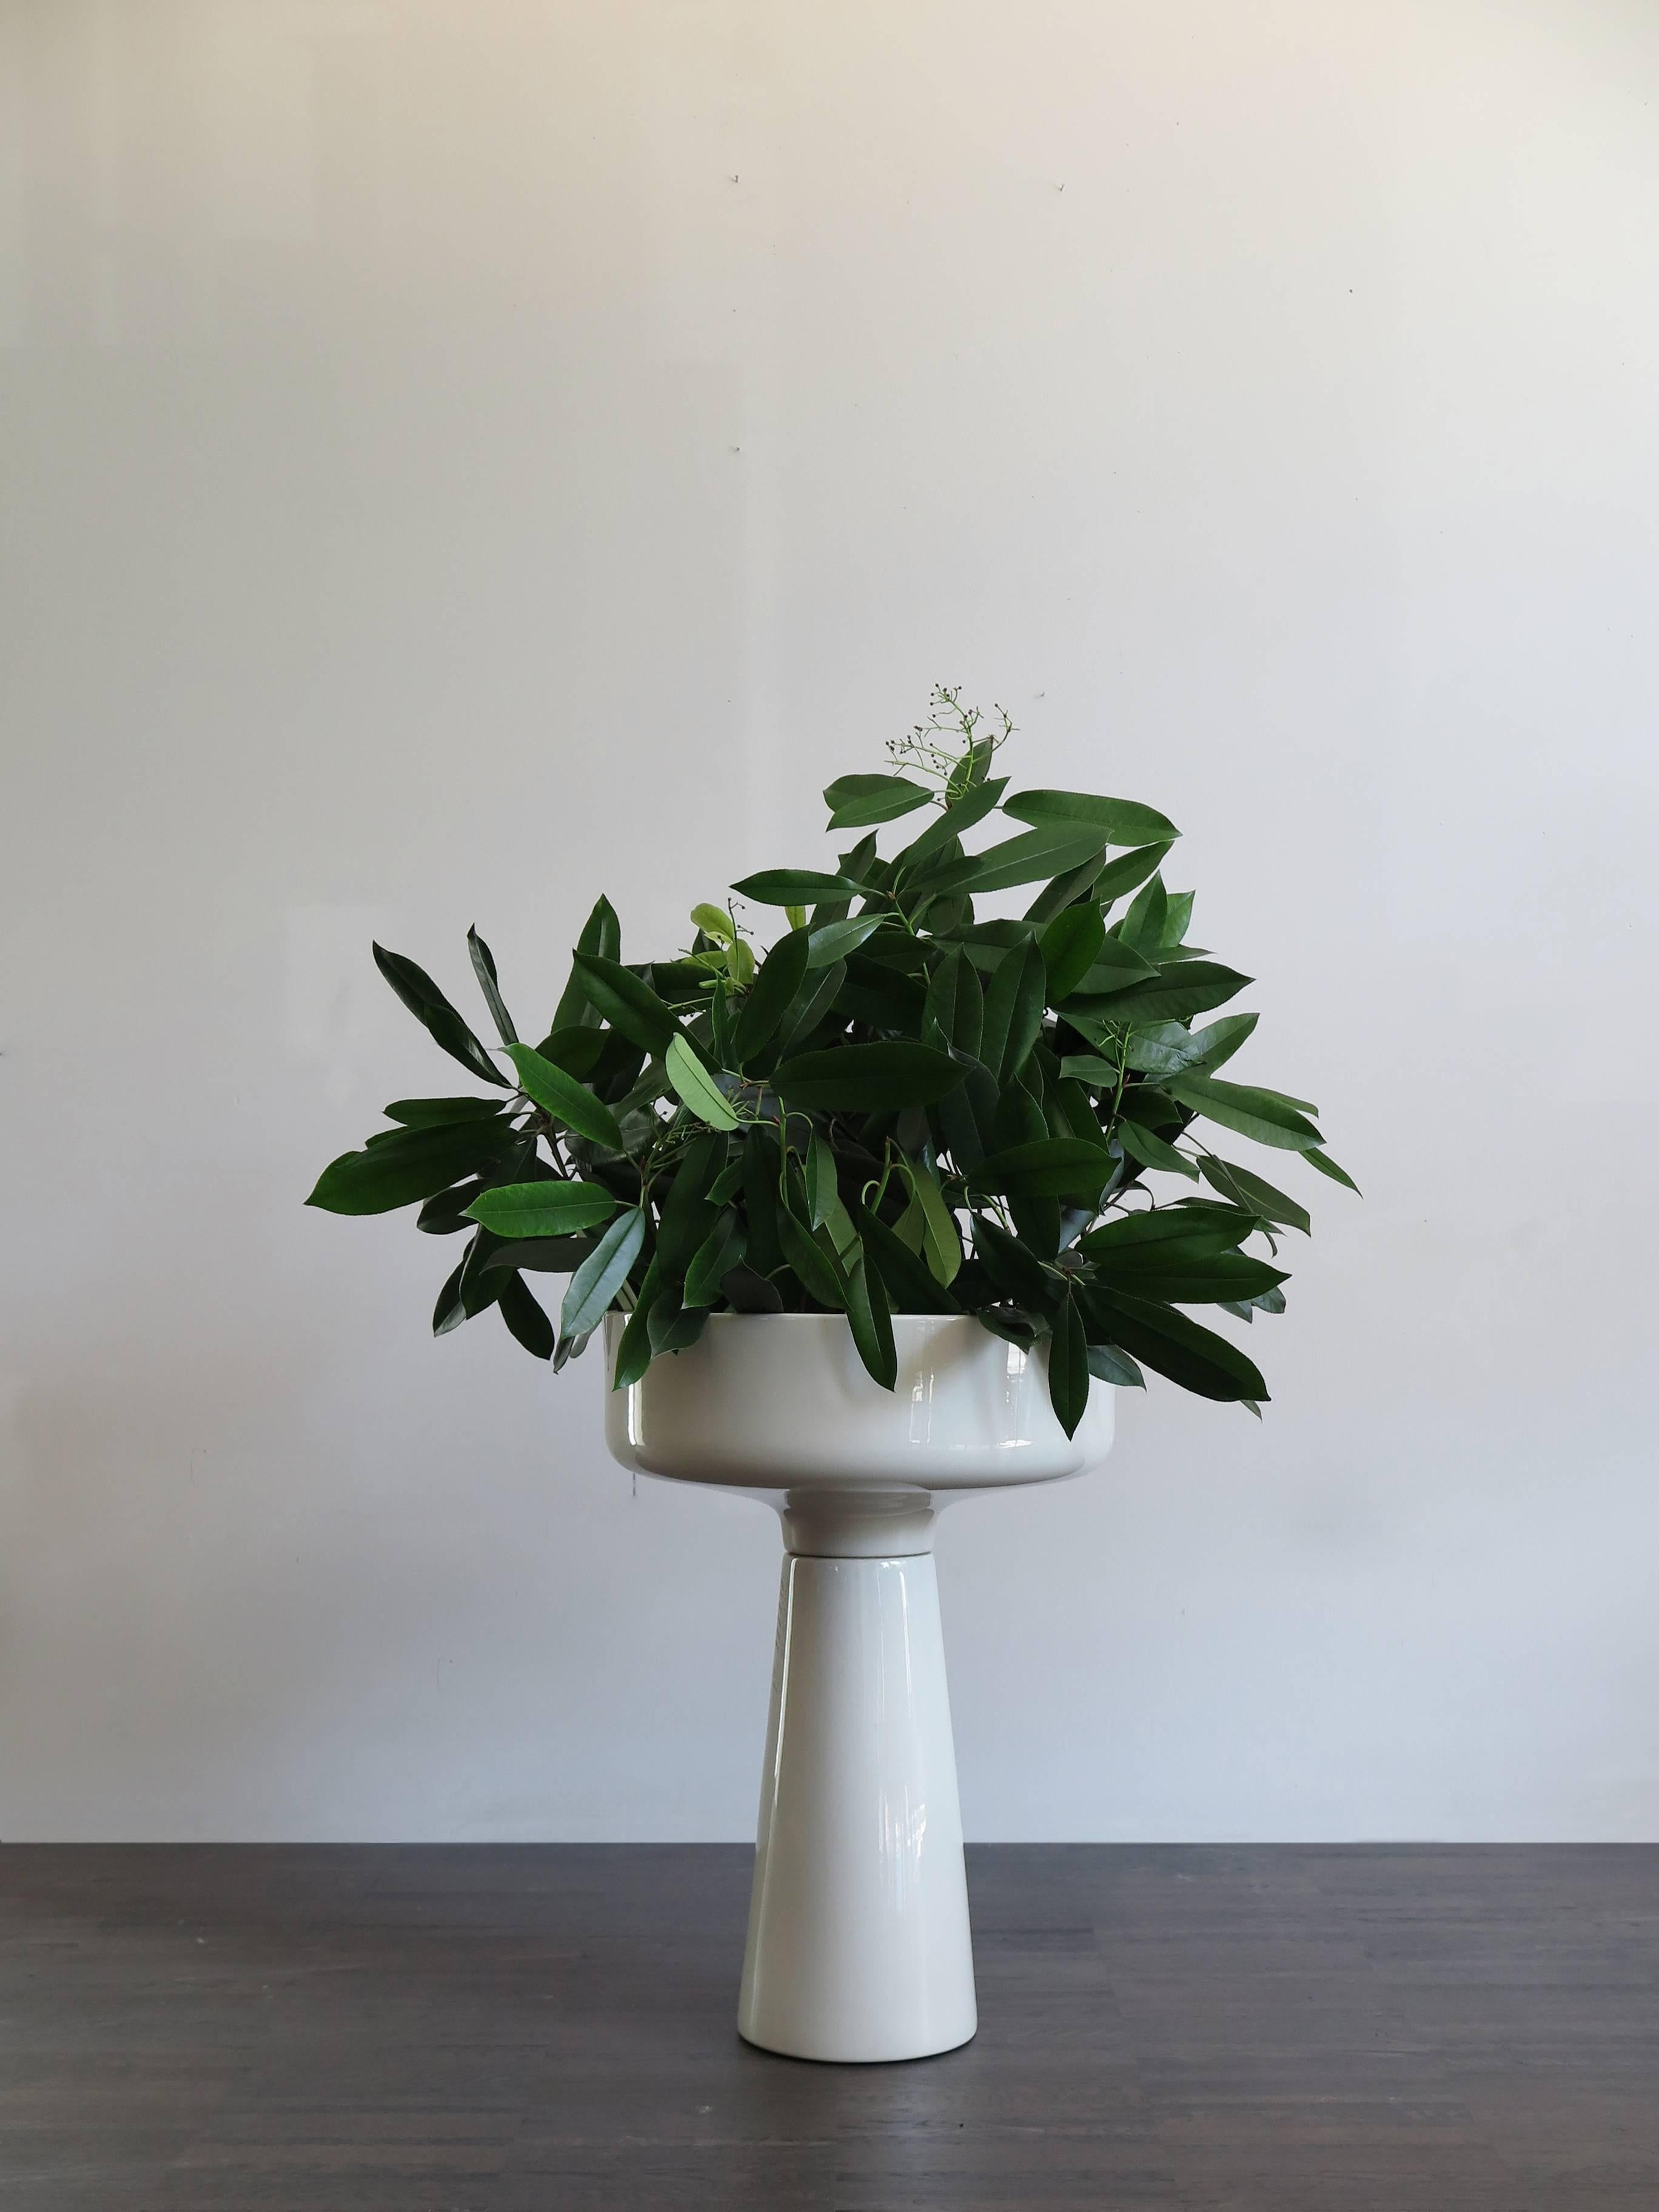 Italian ceramic standing planter comprised of two pieces designed by Angelo Mangiarotti for Fratelli Brambilla with mark impressed on the base, circa 1968.